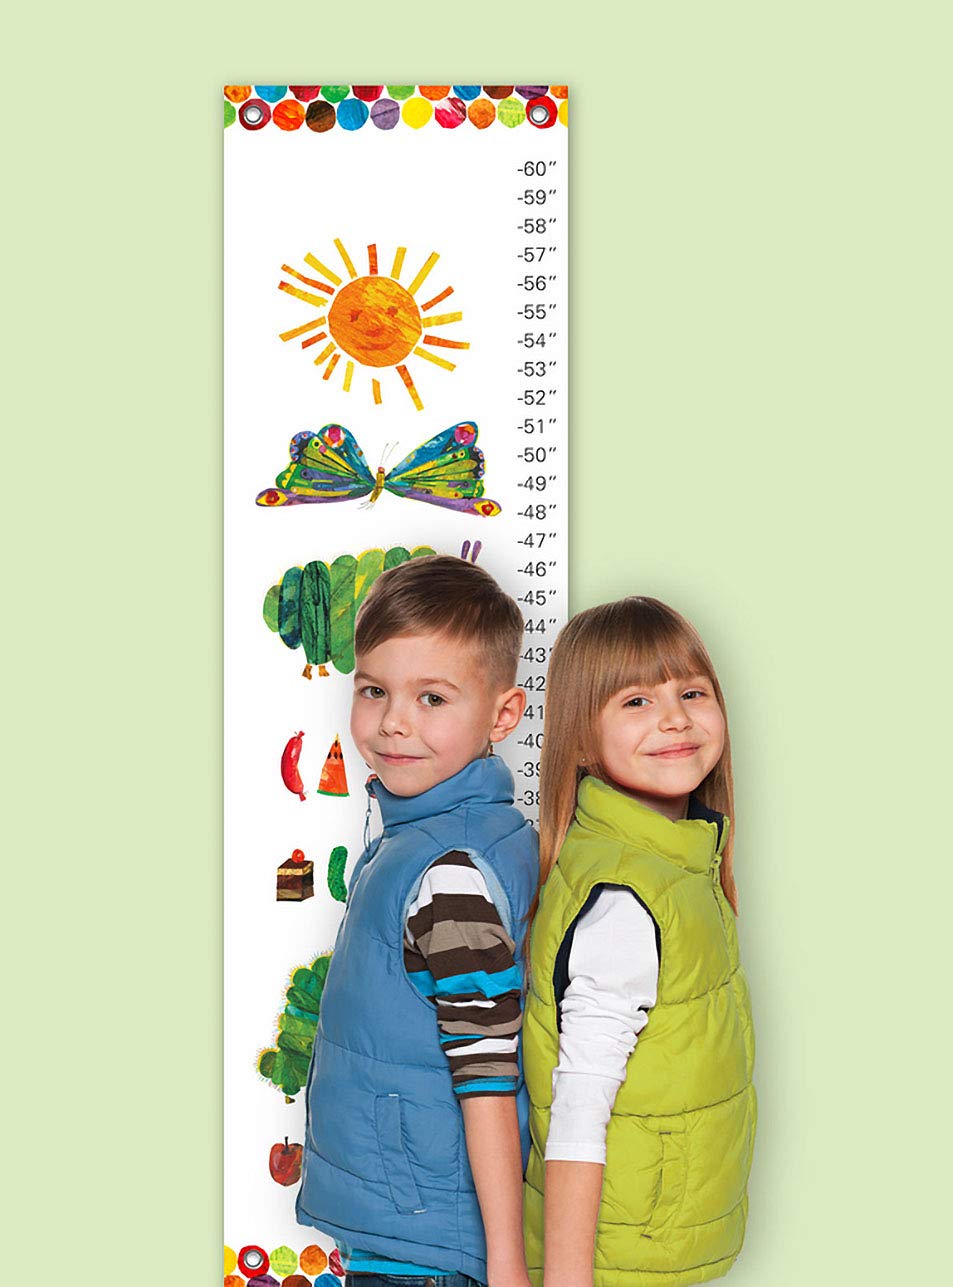 Oopsy Daisy Eric Carle's The Very Hungry Caterpillar Growth Chart, 12 by 42-Inch